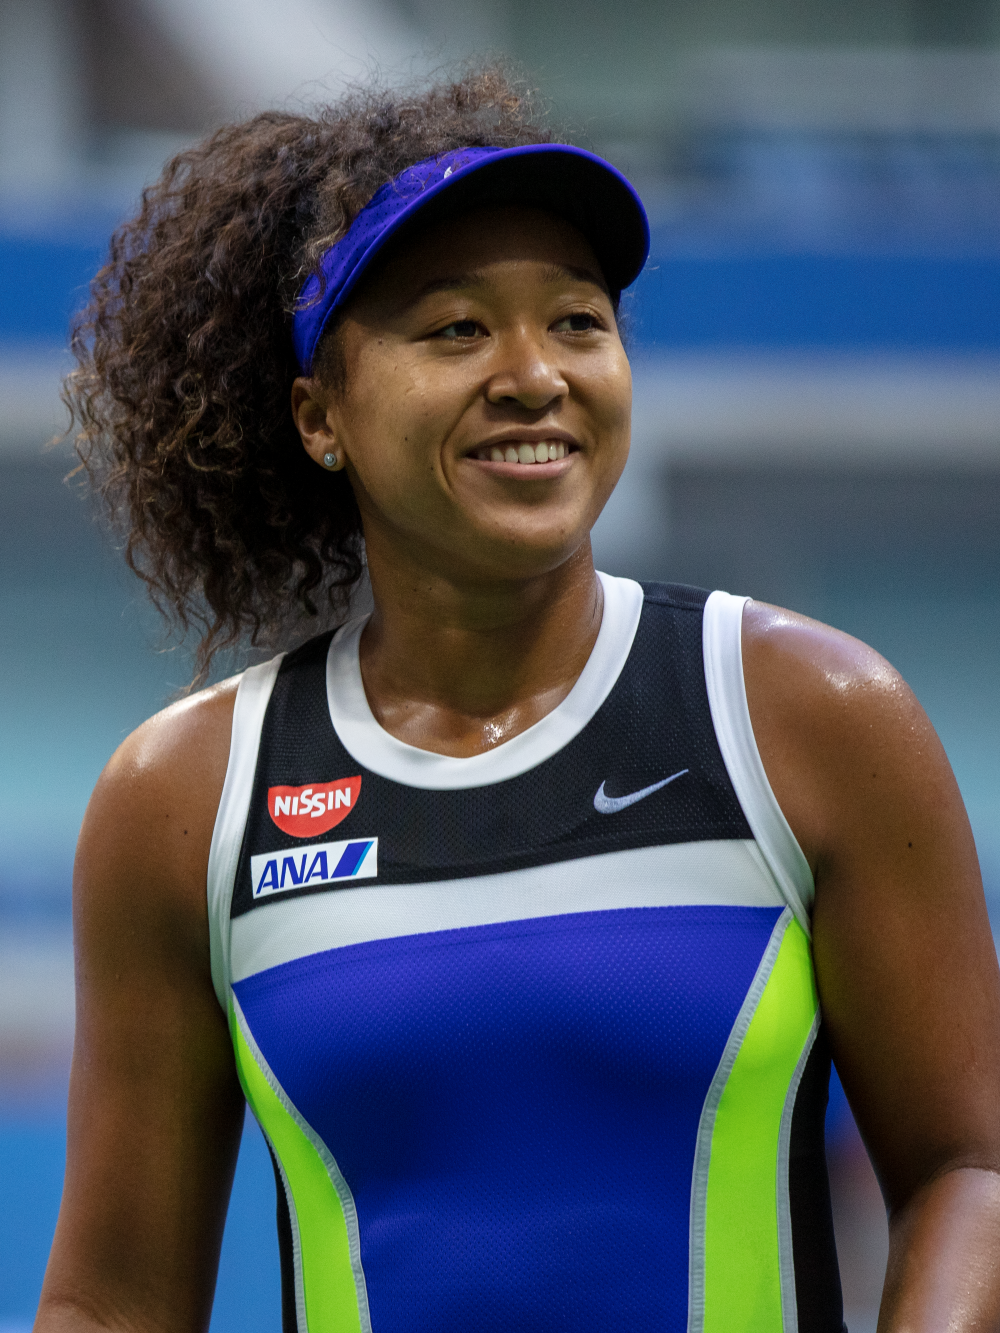 Naomi Osaka playing tennis wearing a blue cap and black and blue sport vest. She is smiling to the right. Black history month